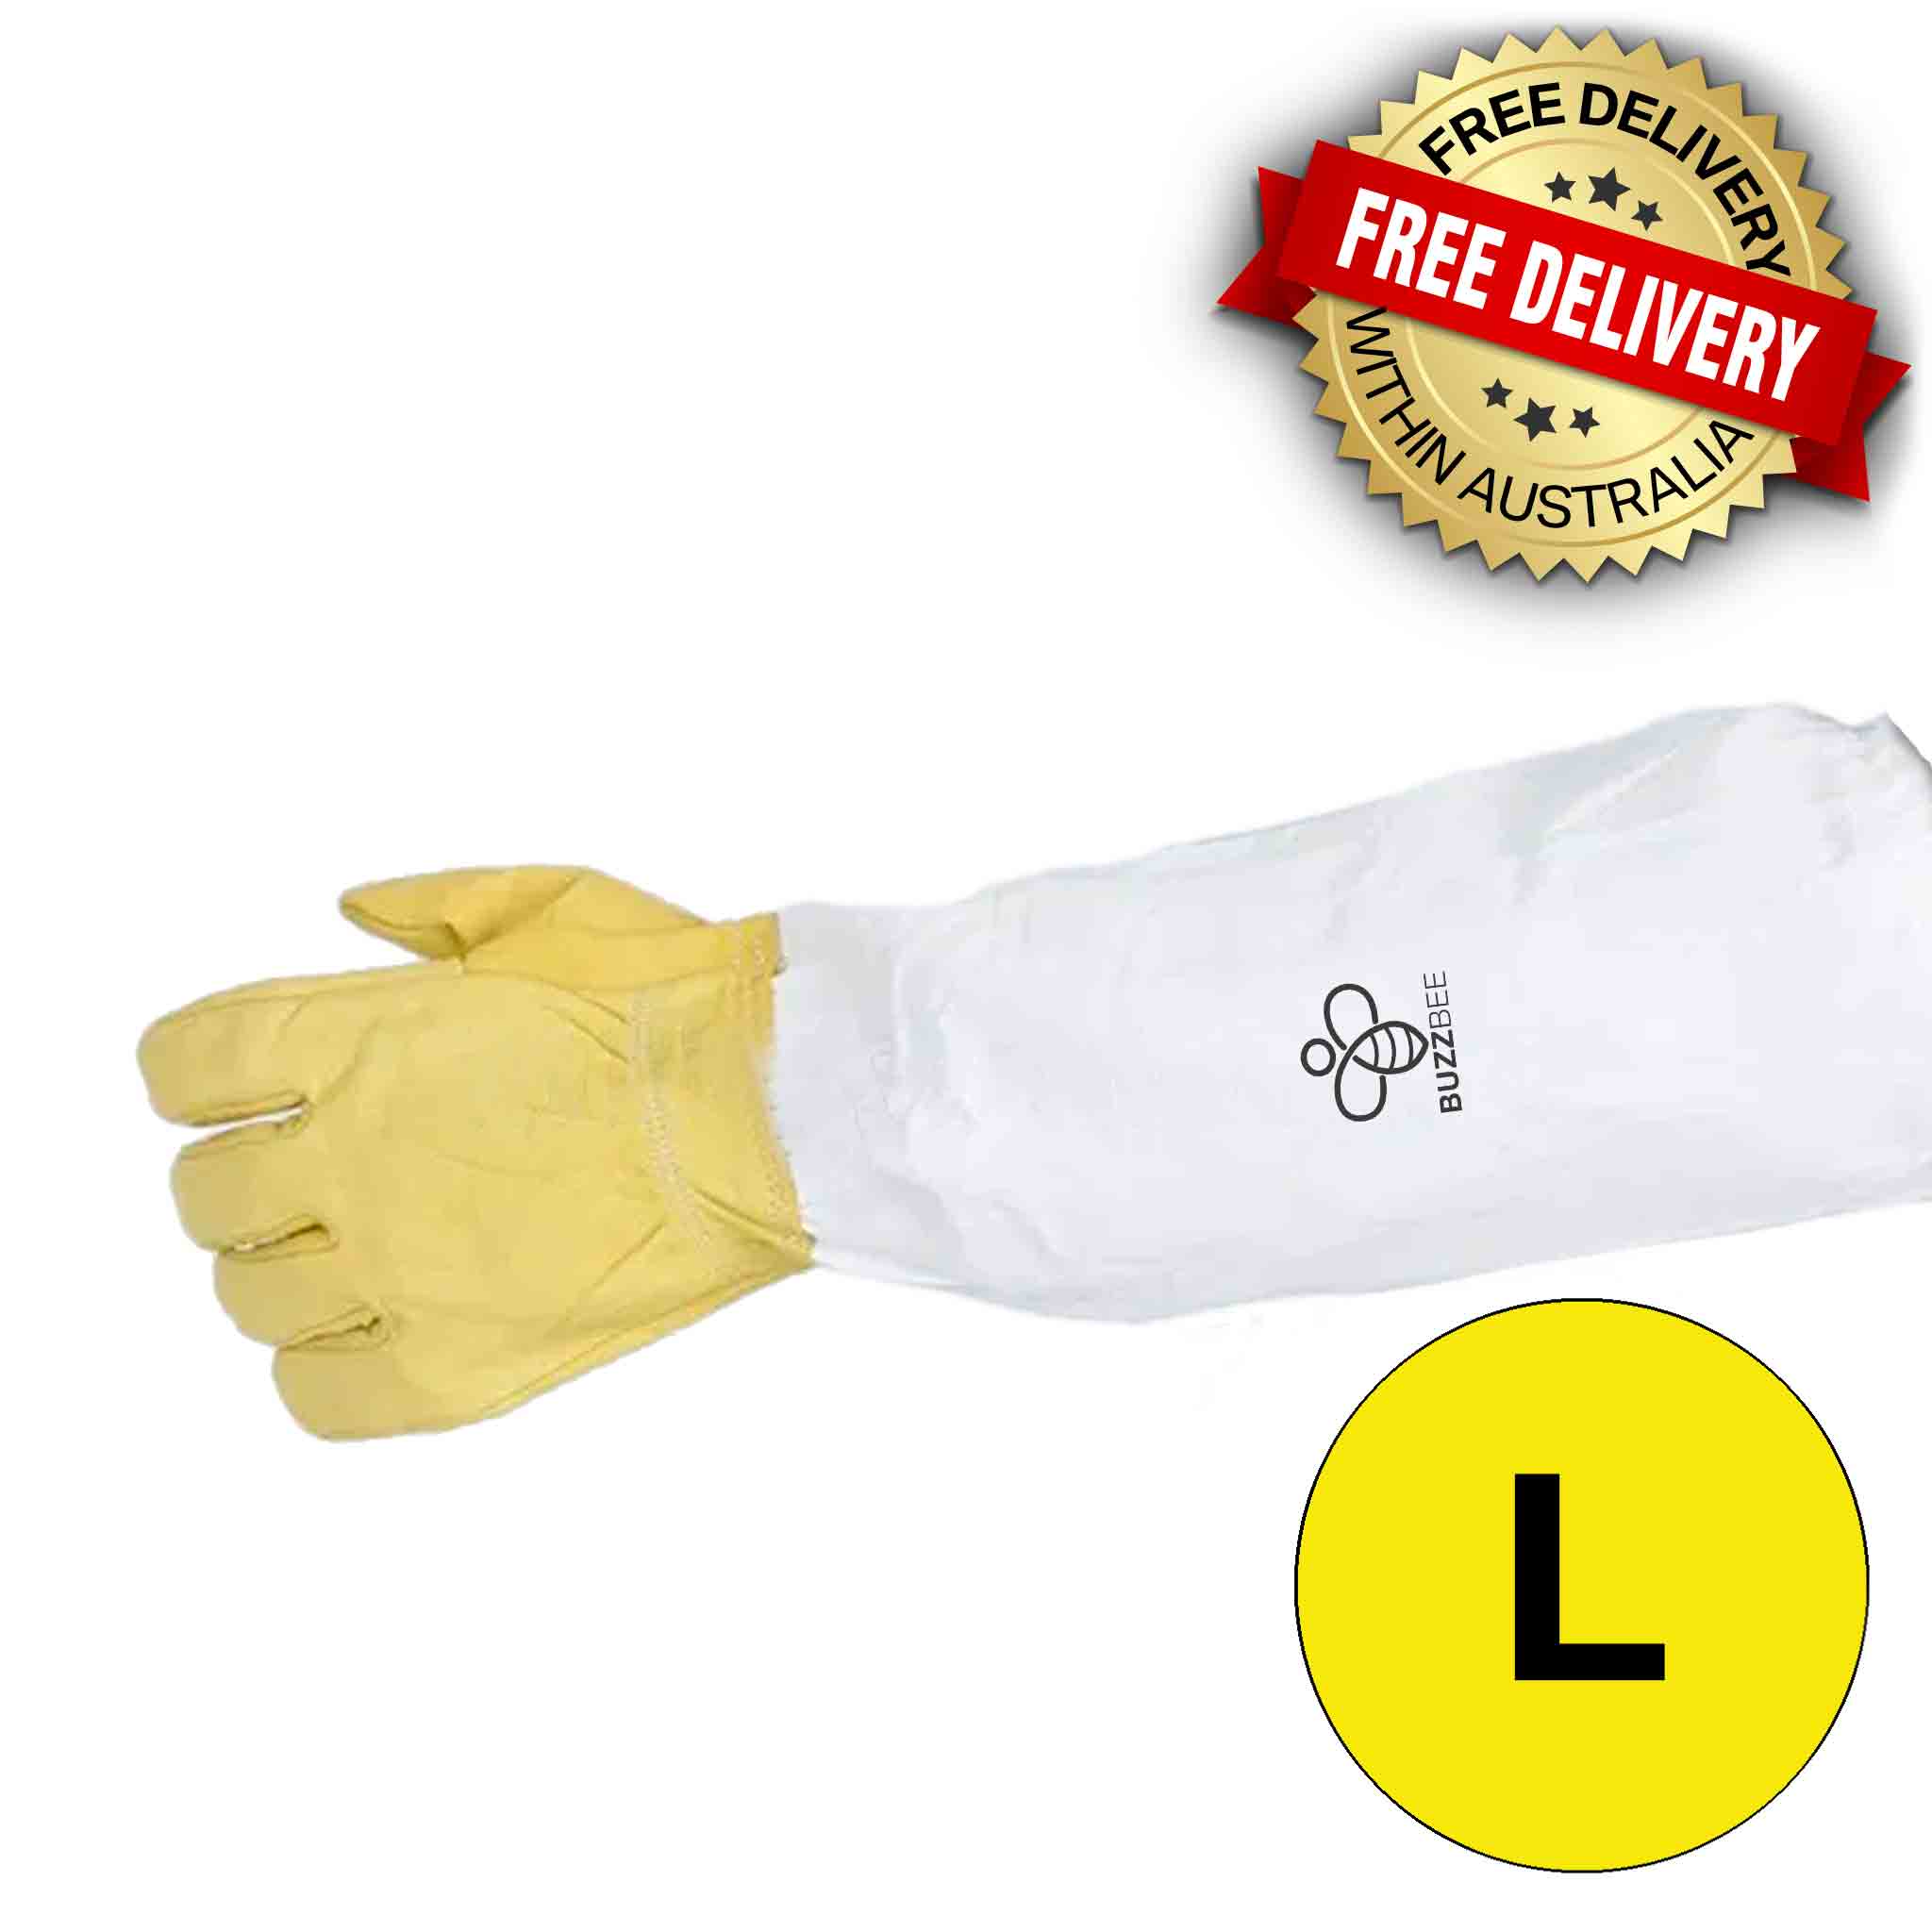 Buzzbee Beekeeping Gloves - Sheepskin - White - Clothing collection by Buzzbee Beekeeping Supplies